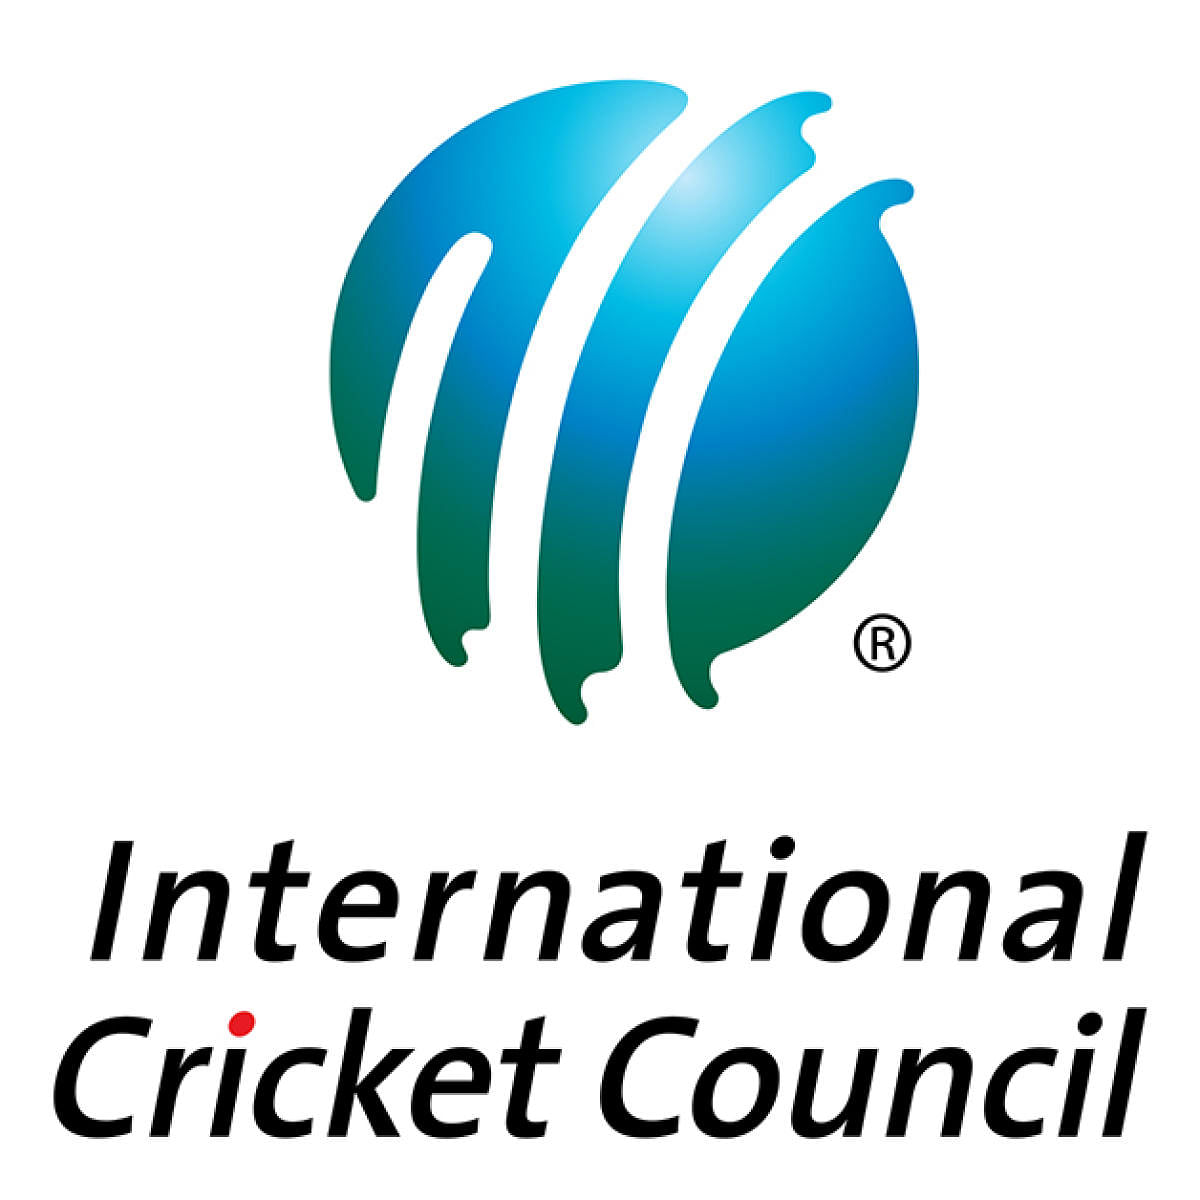 Haven't got CWI backing for ICC Chairman's post: Dave Cameron